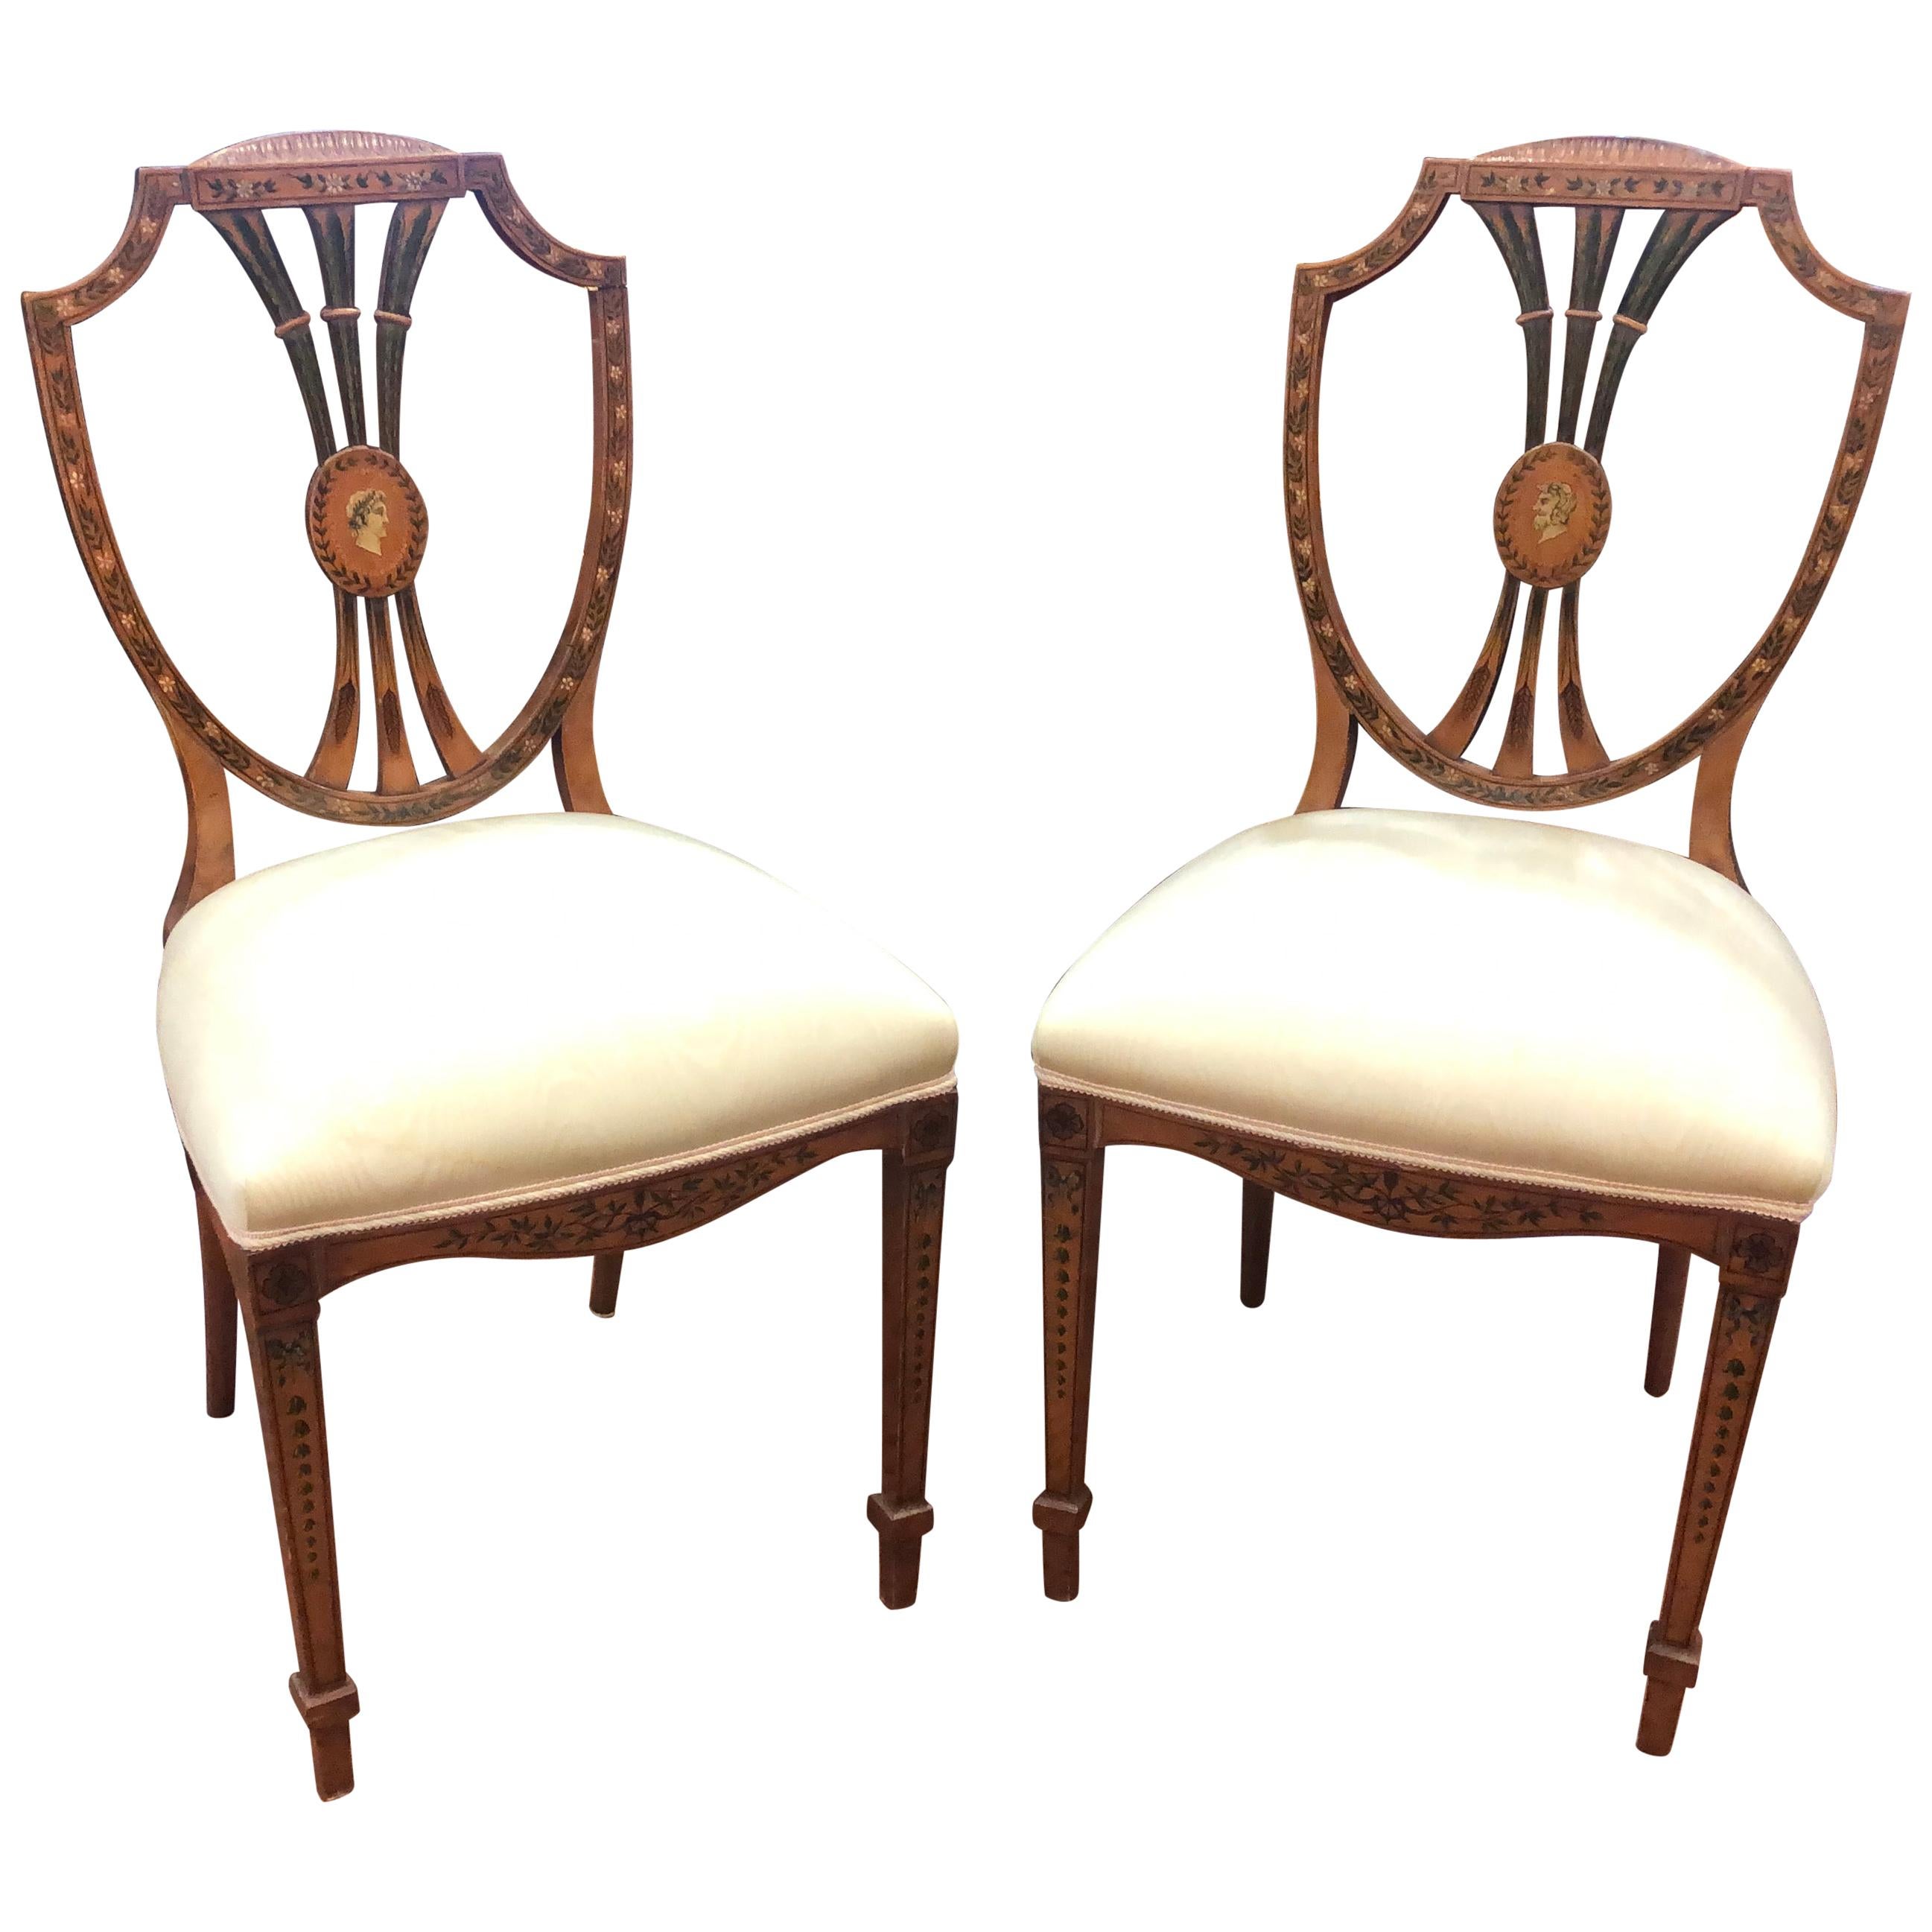 18th Century Adam Style England Satinwood Painting Pair of Chairs, 1770s